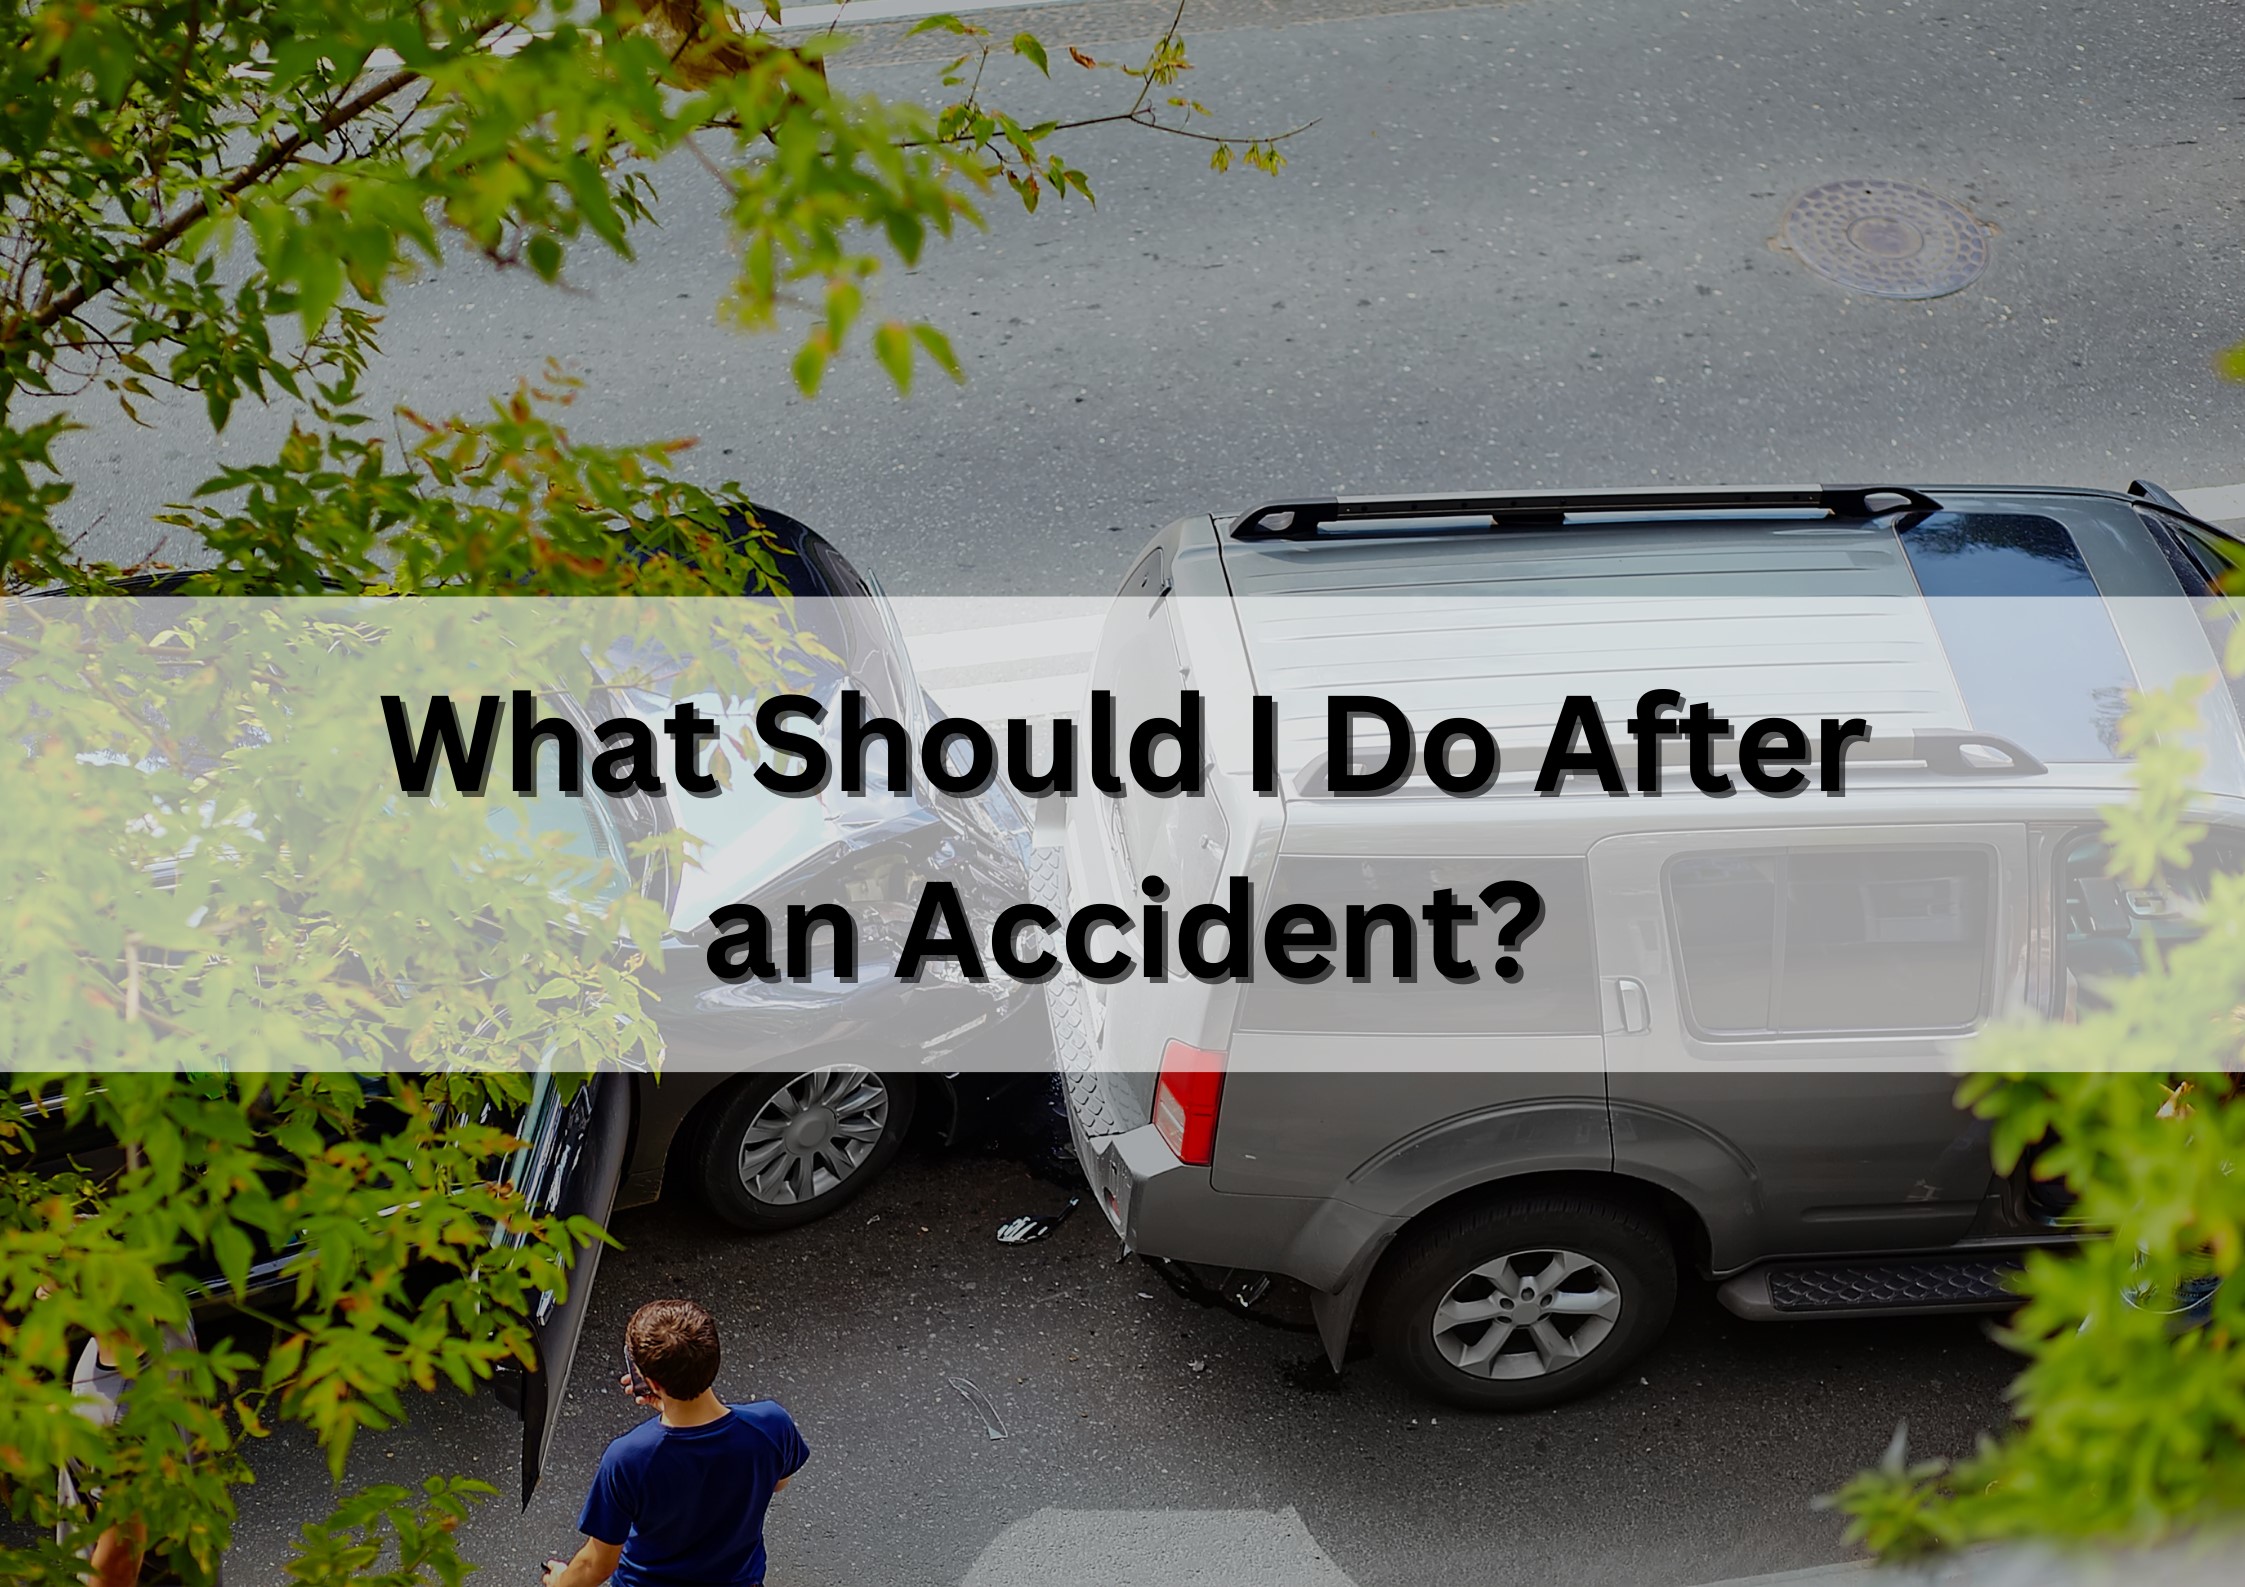 Personal Injury Lawyer for car accidents in California